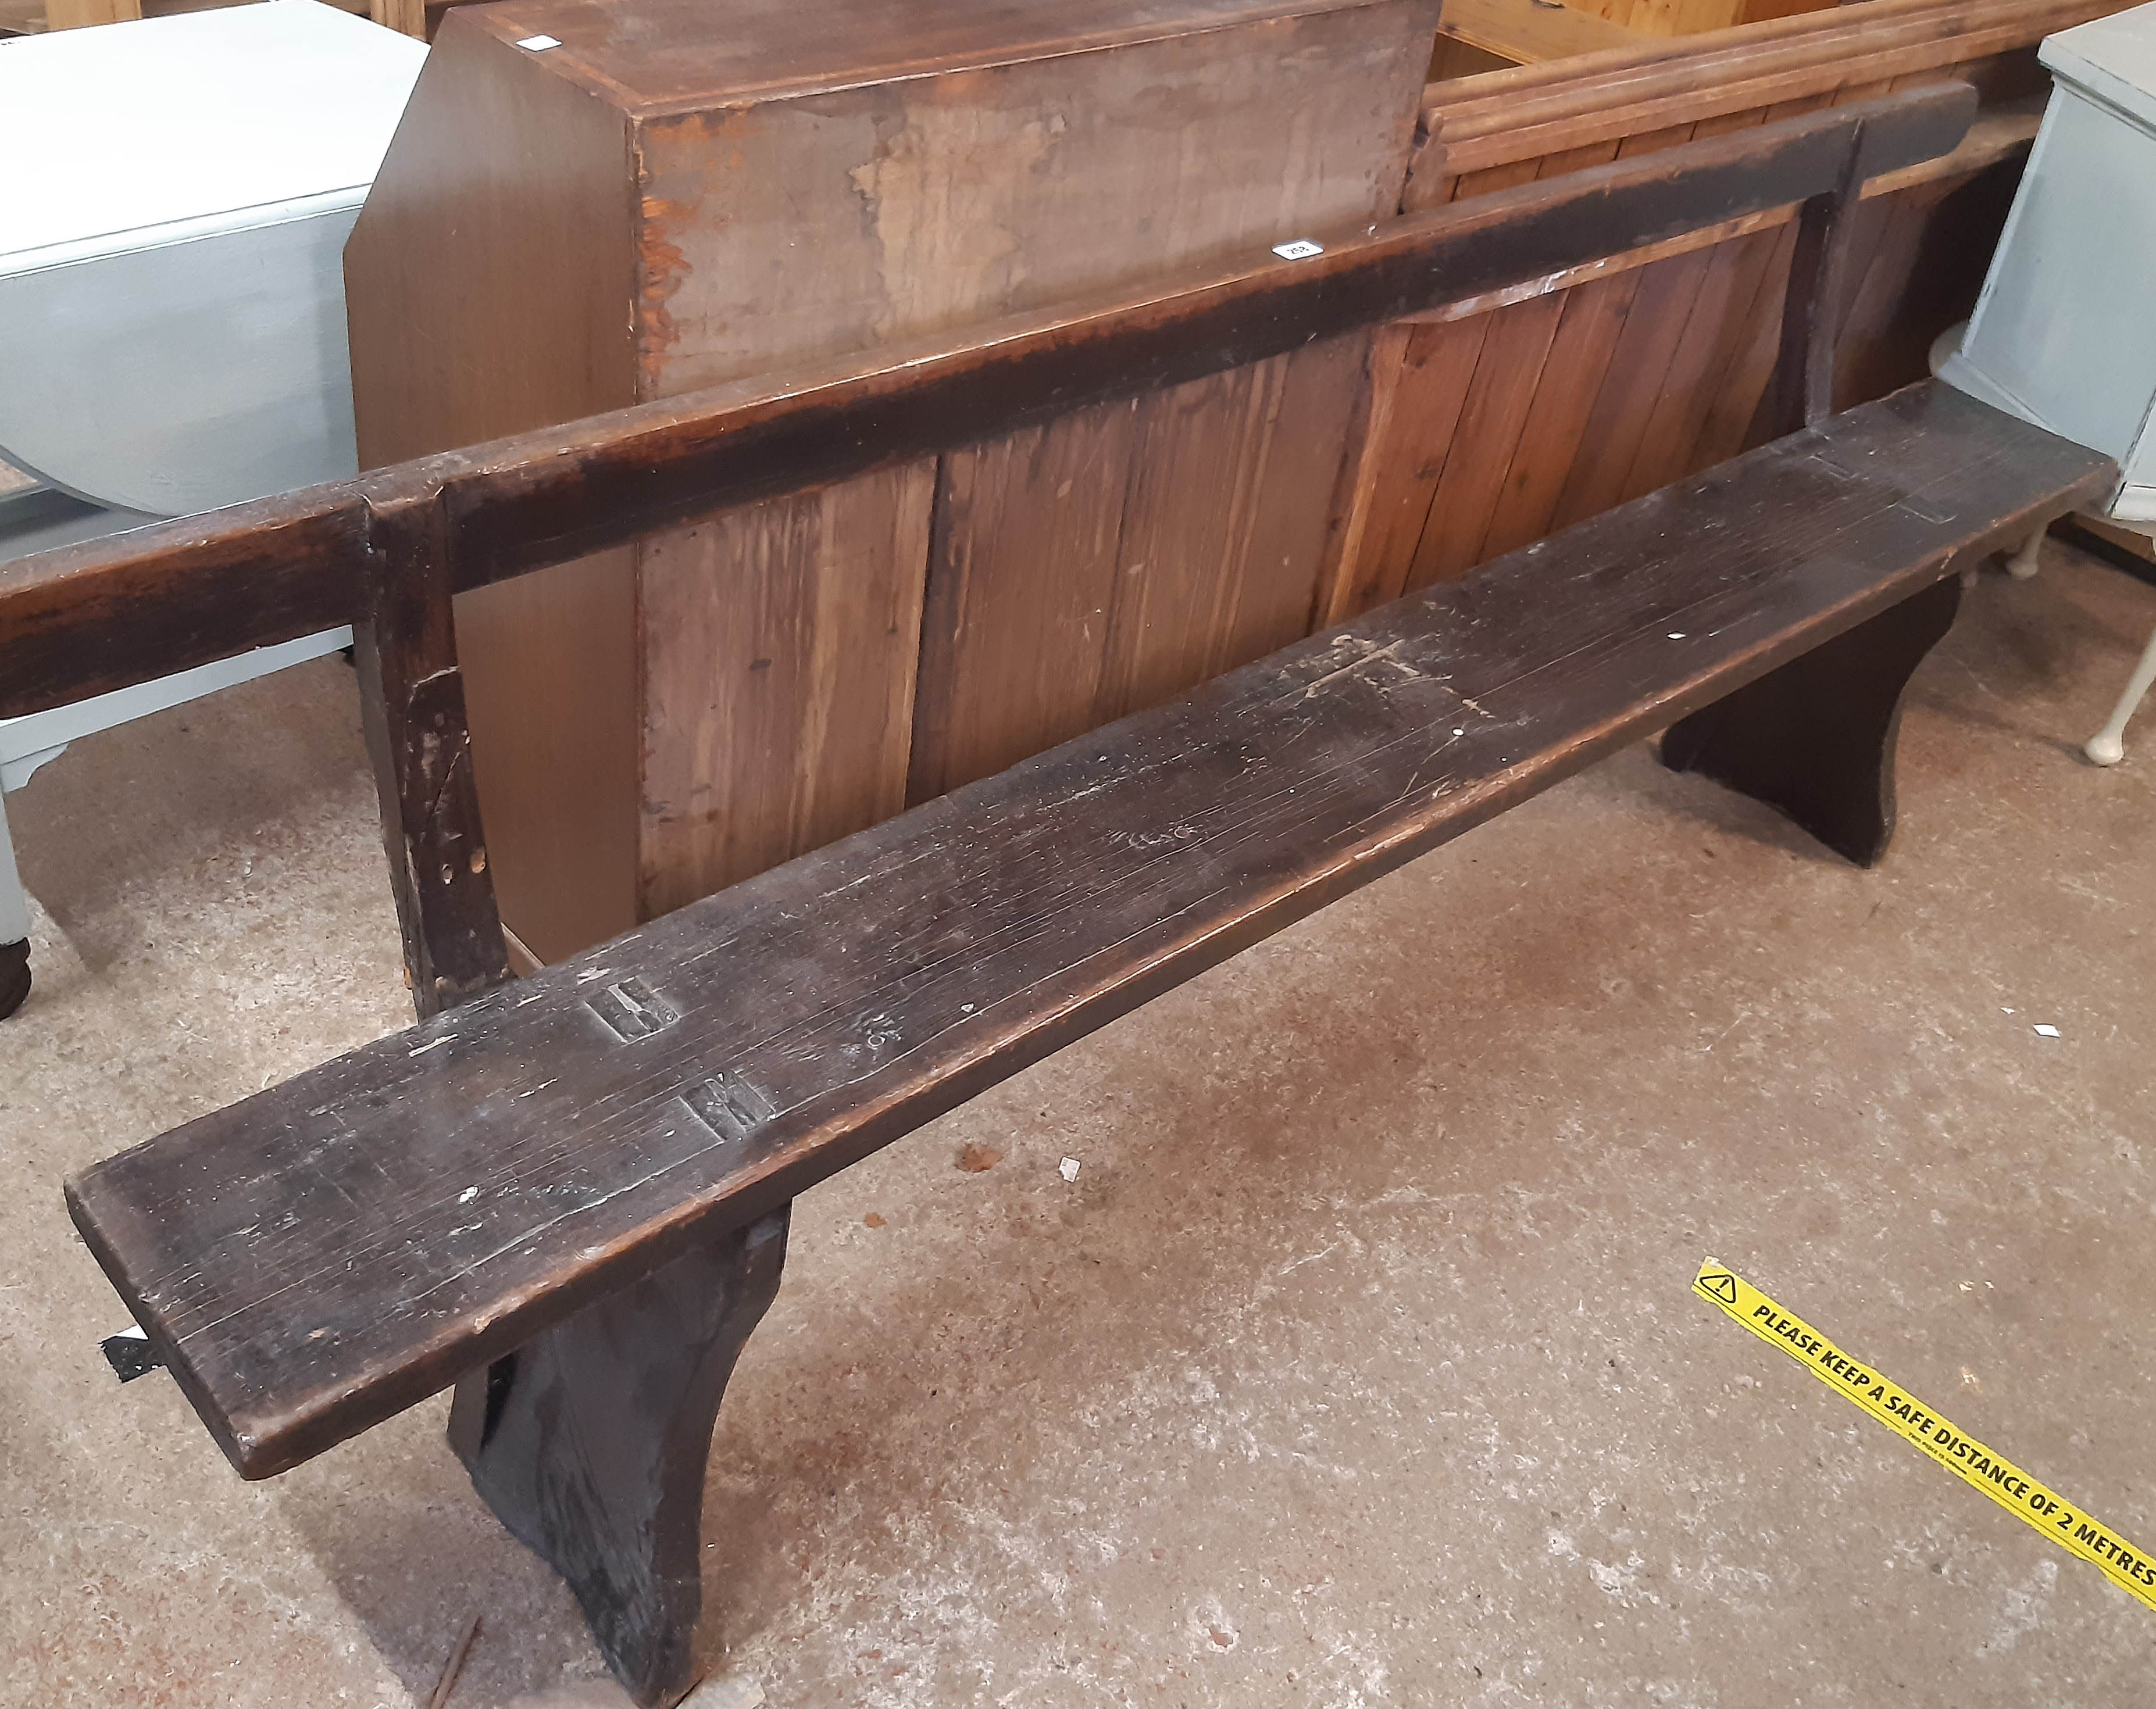 A 7' antique stained pine long plank bench with back rail and splayed shaped standard ends - one